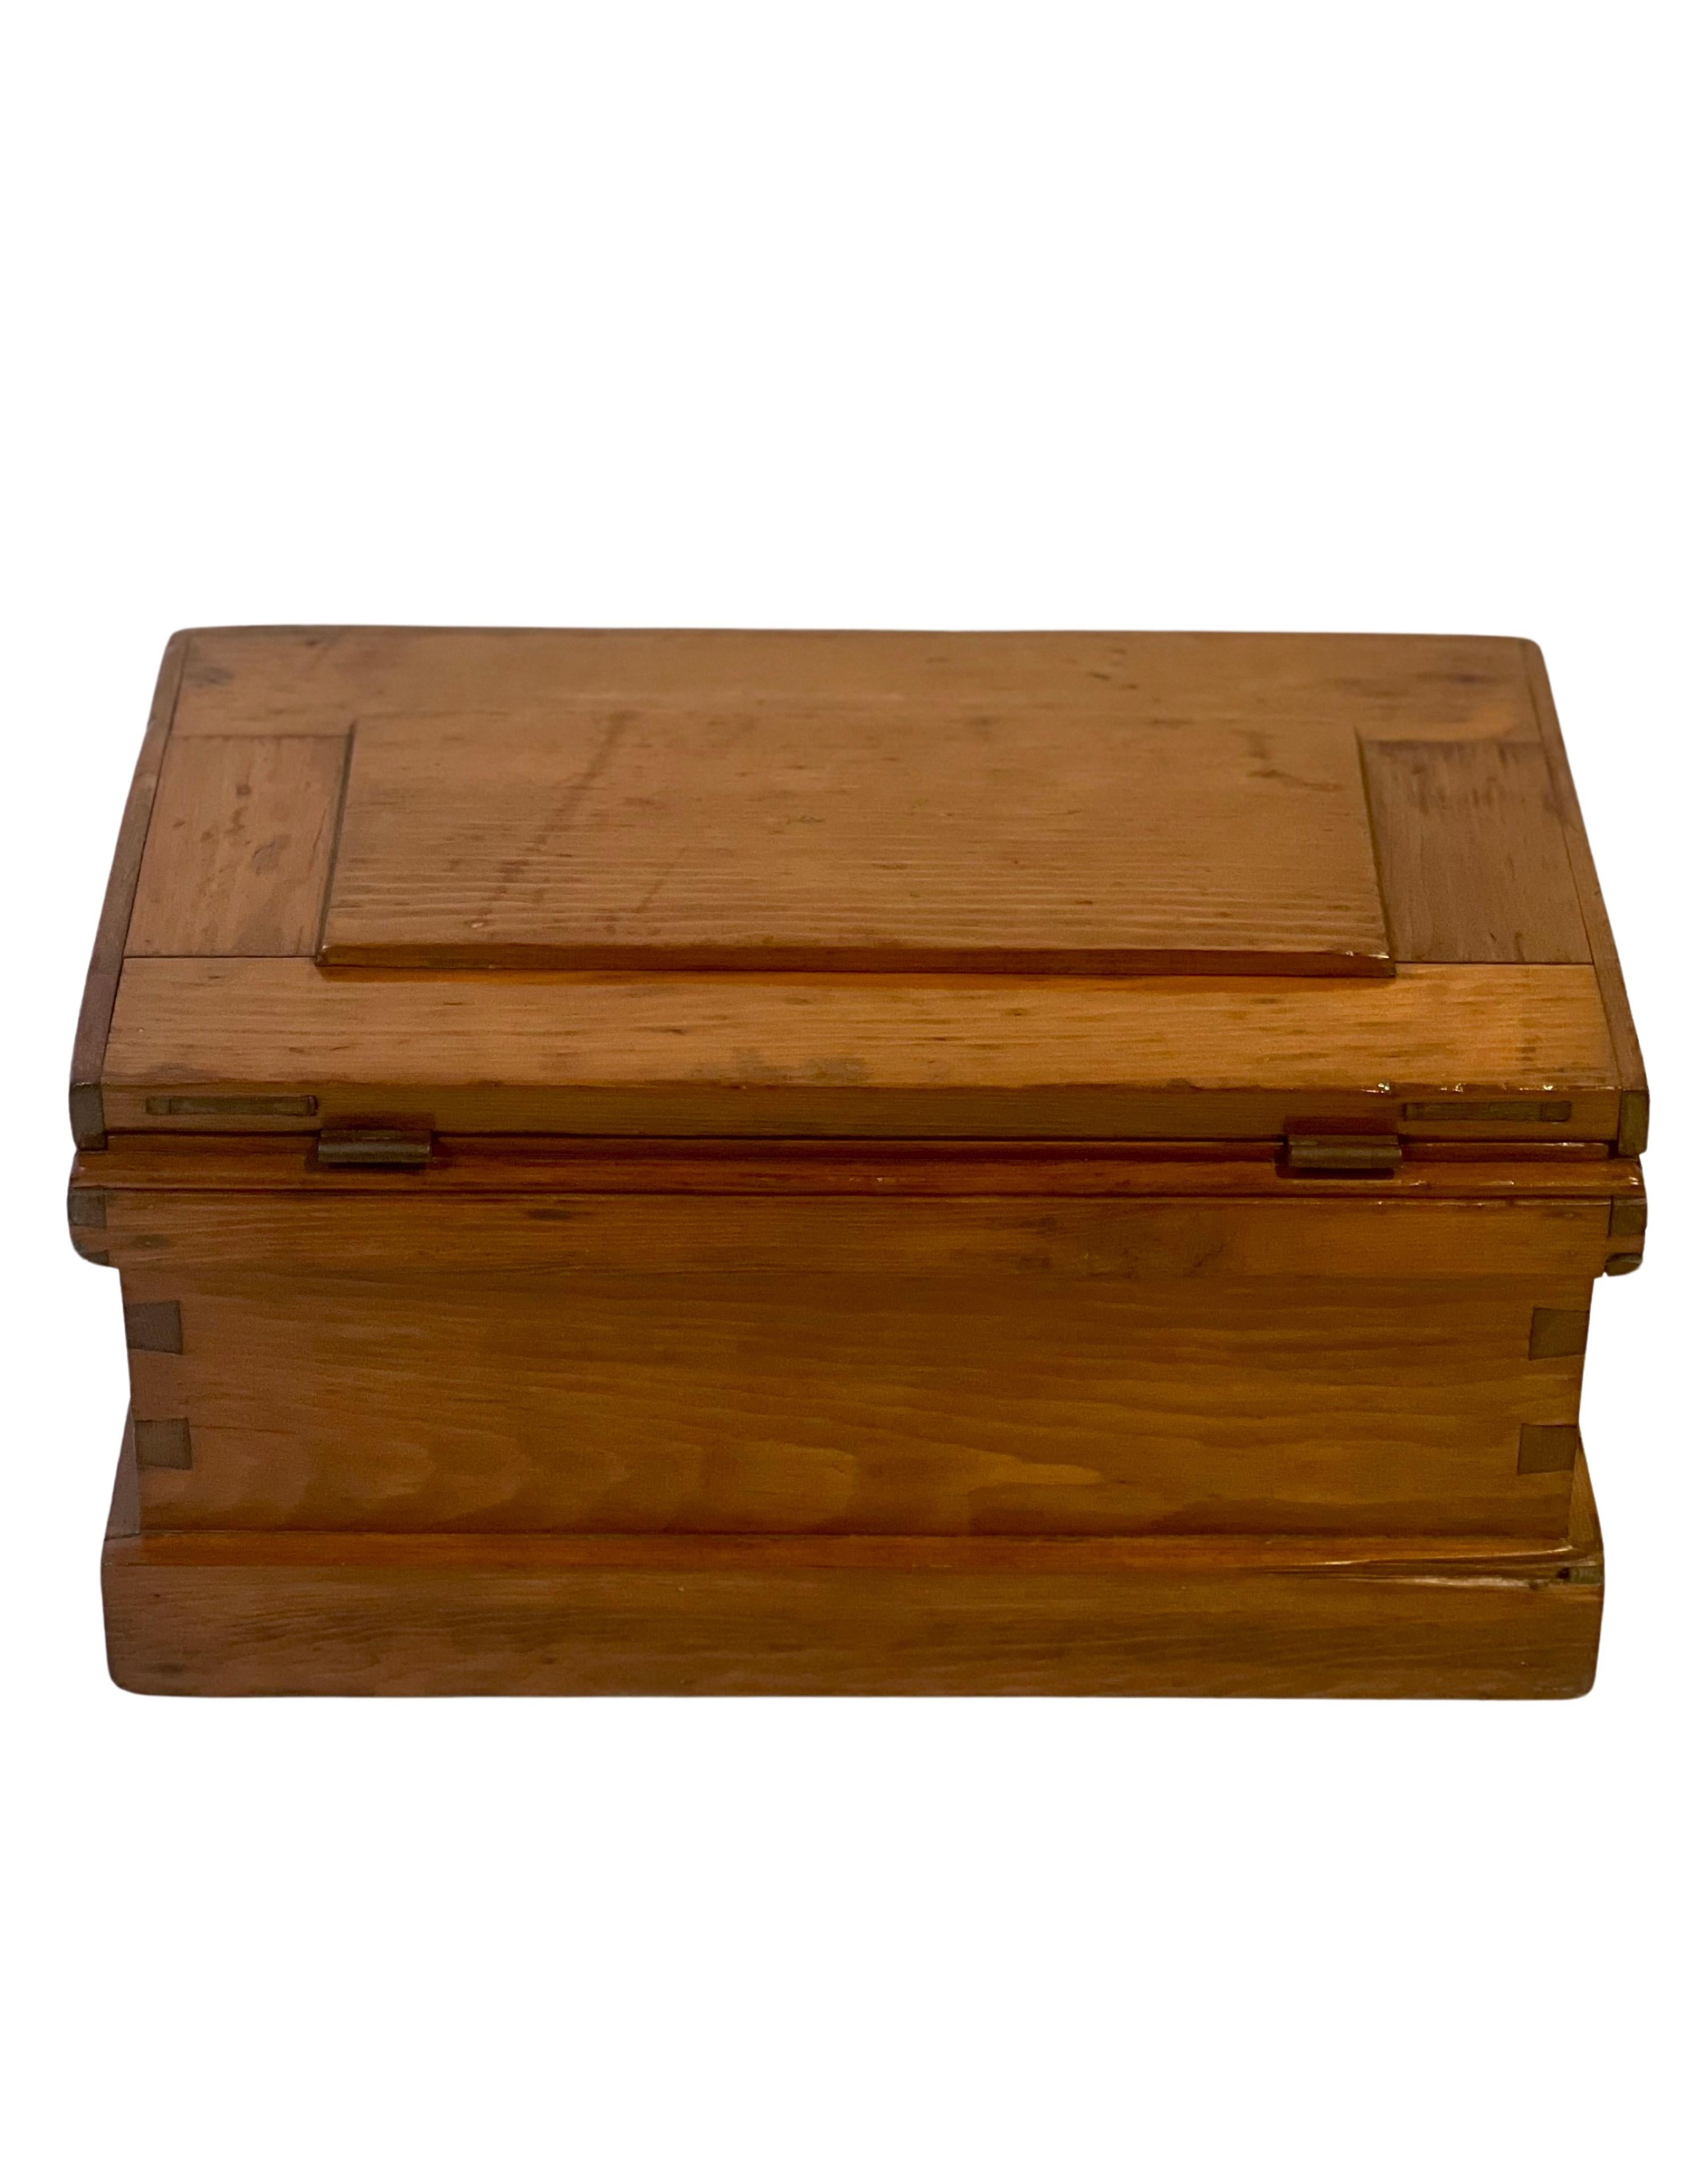 Antique Handcrafted Small Merchant's Chest with Lock and Key In Good Condition For Sale In Doylestown, PA